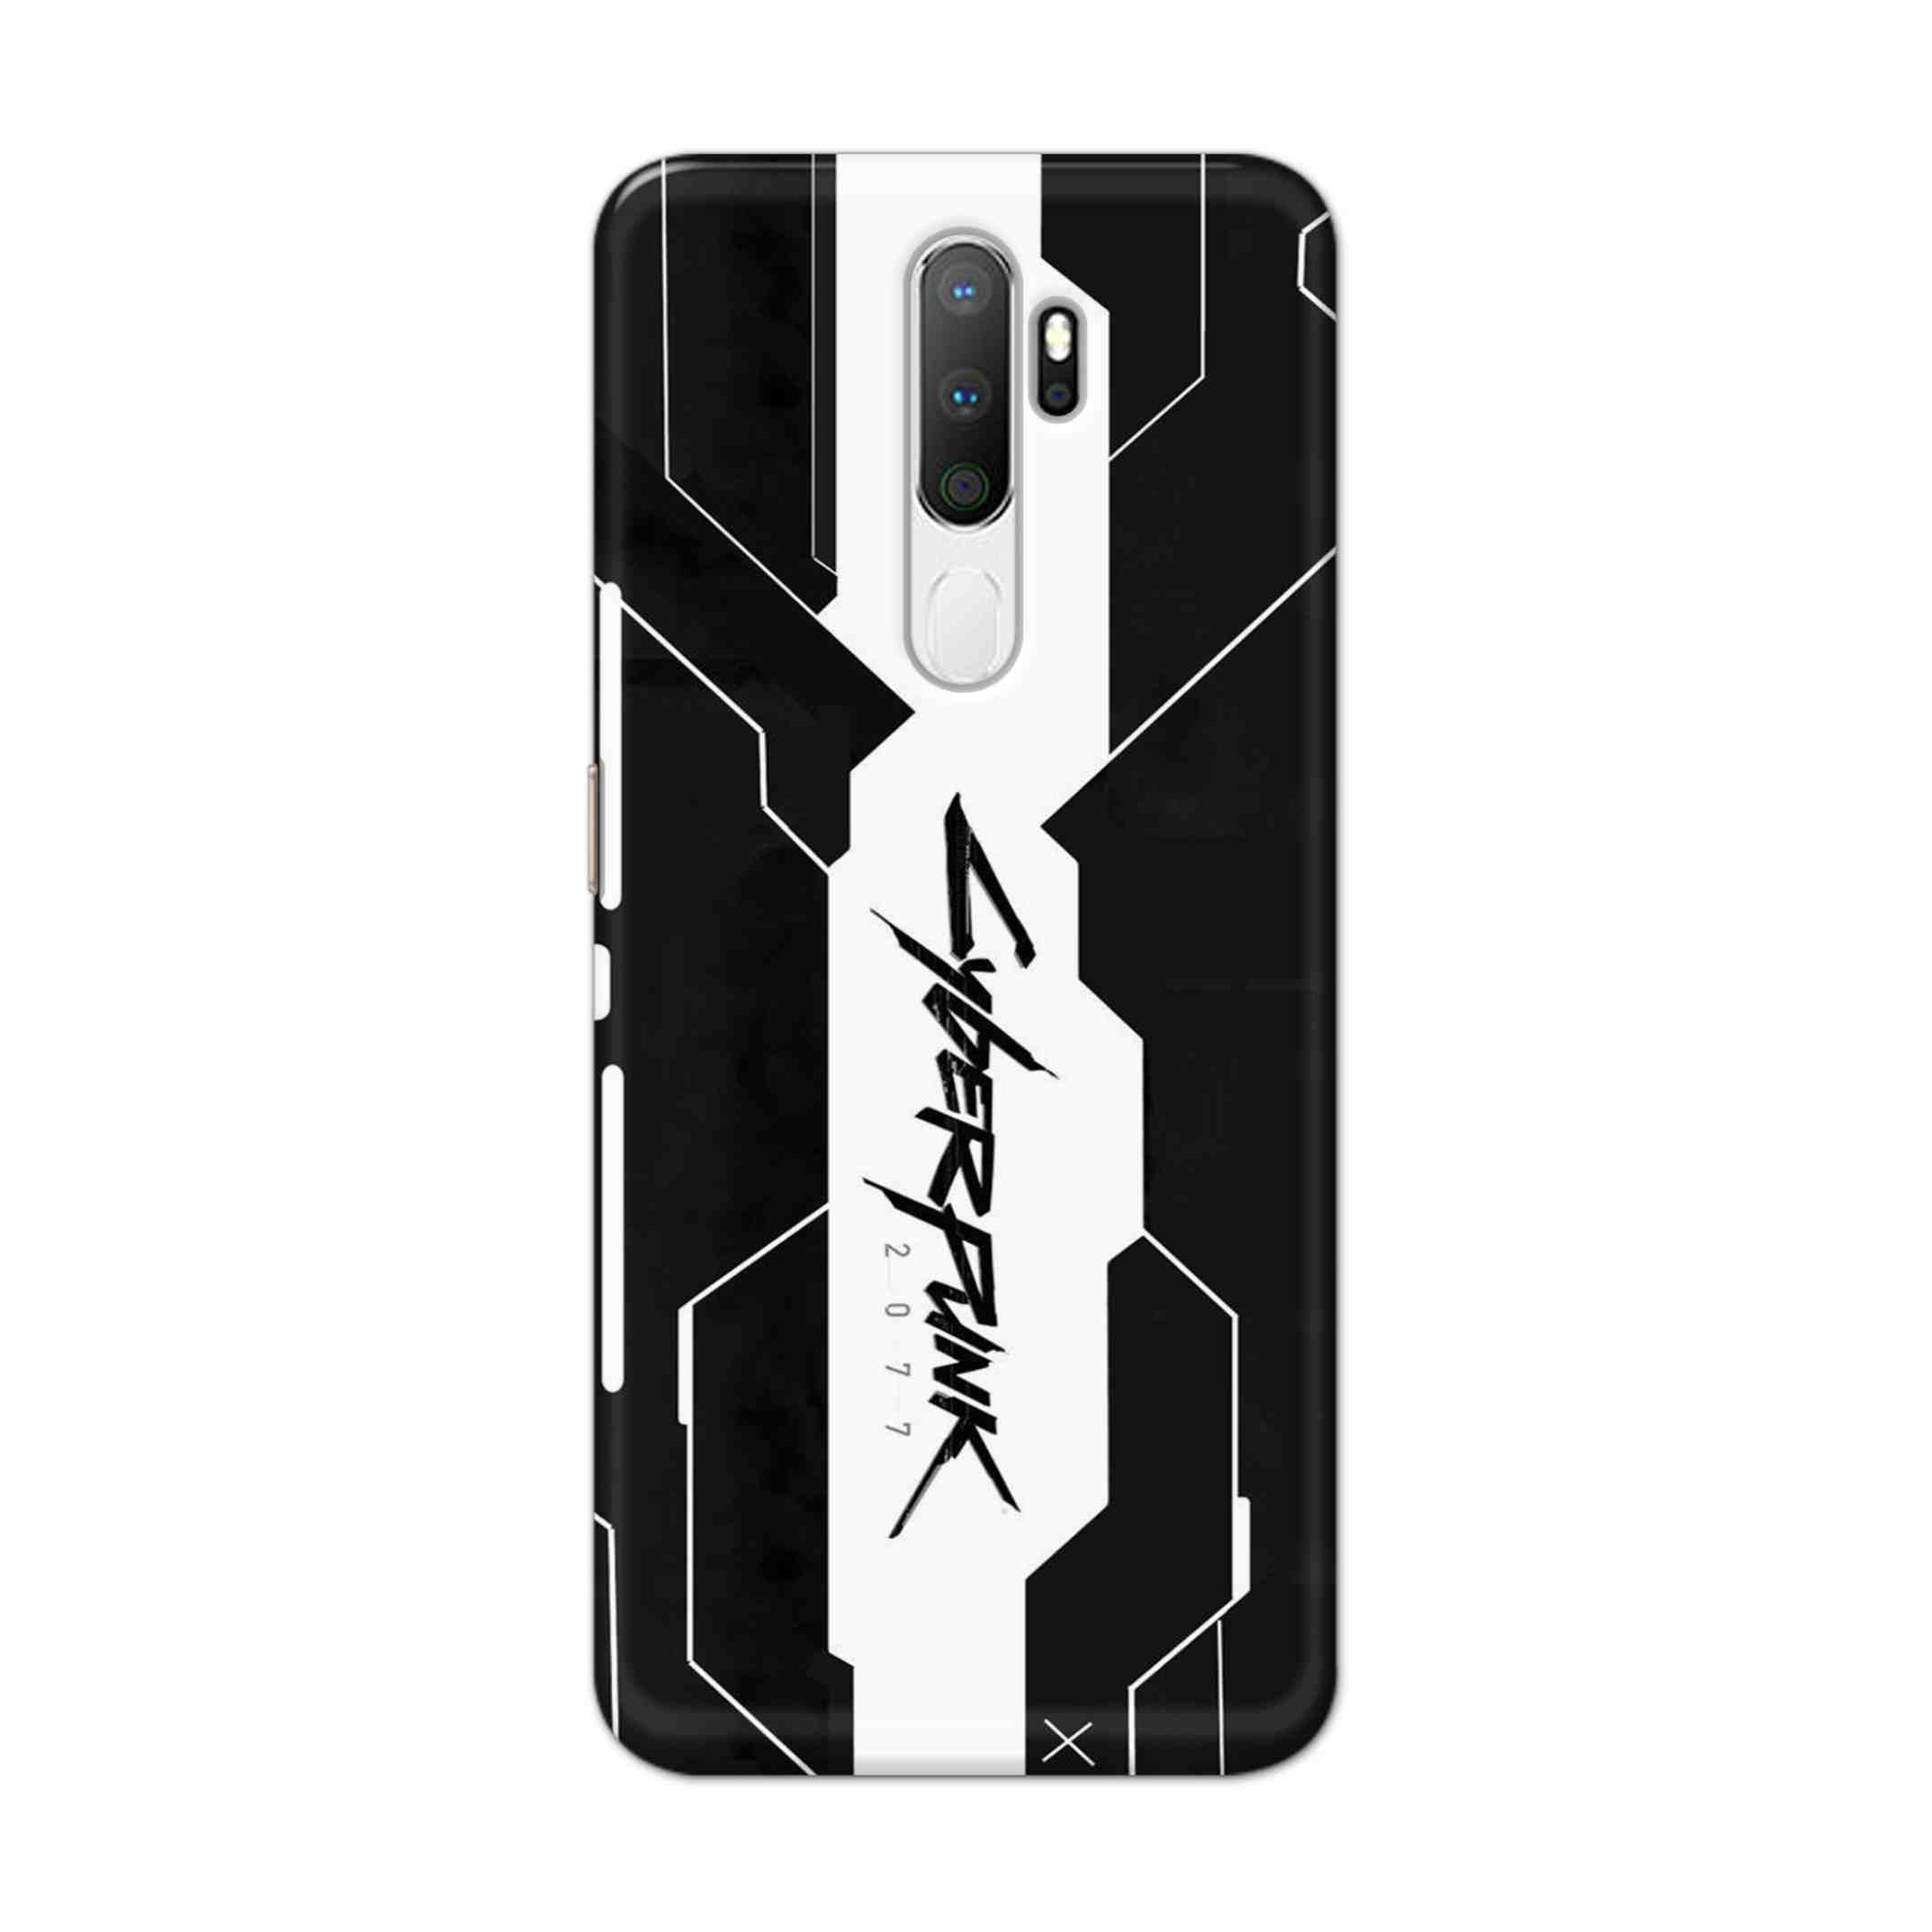 Buy Cyberpunk 2077 Art Hard Back Mobile Phone Case Cover For Oppo A5 (2020) Online